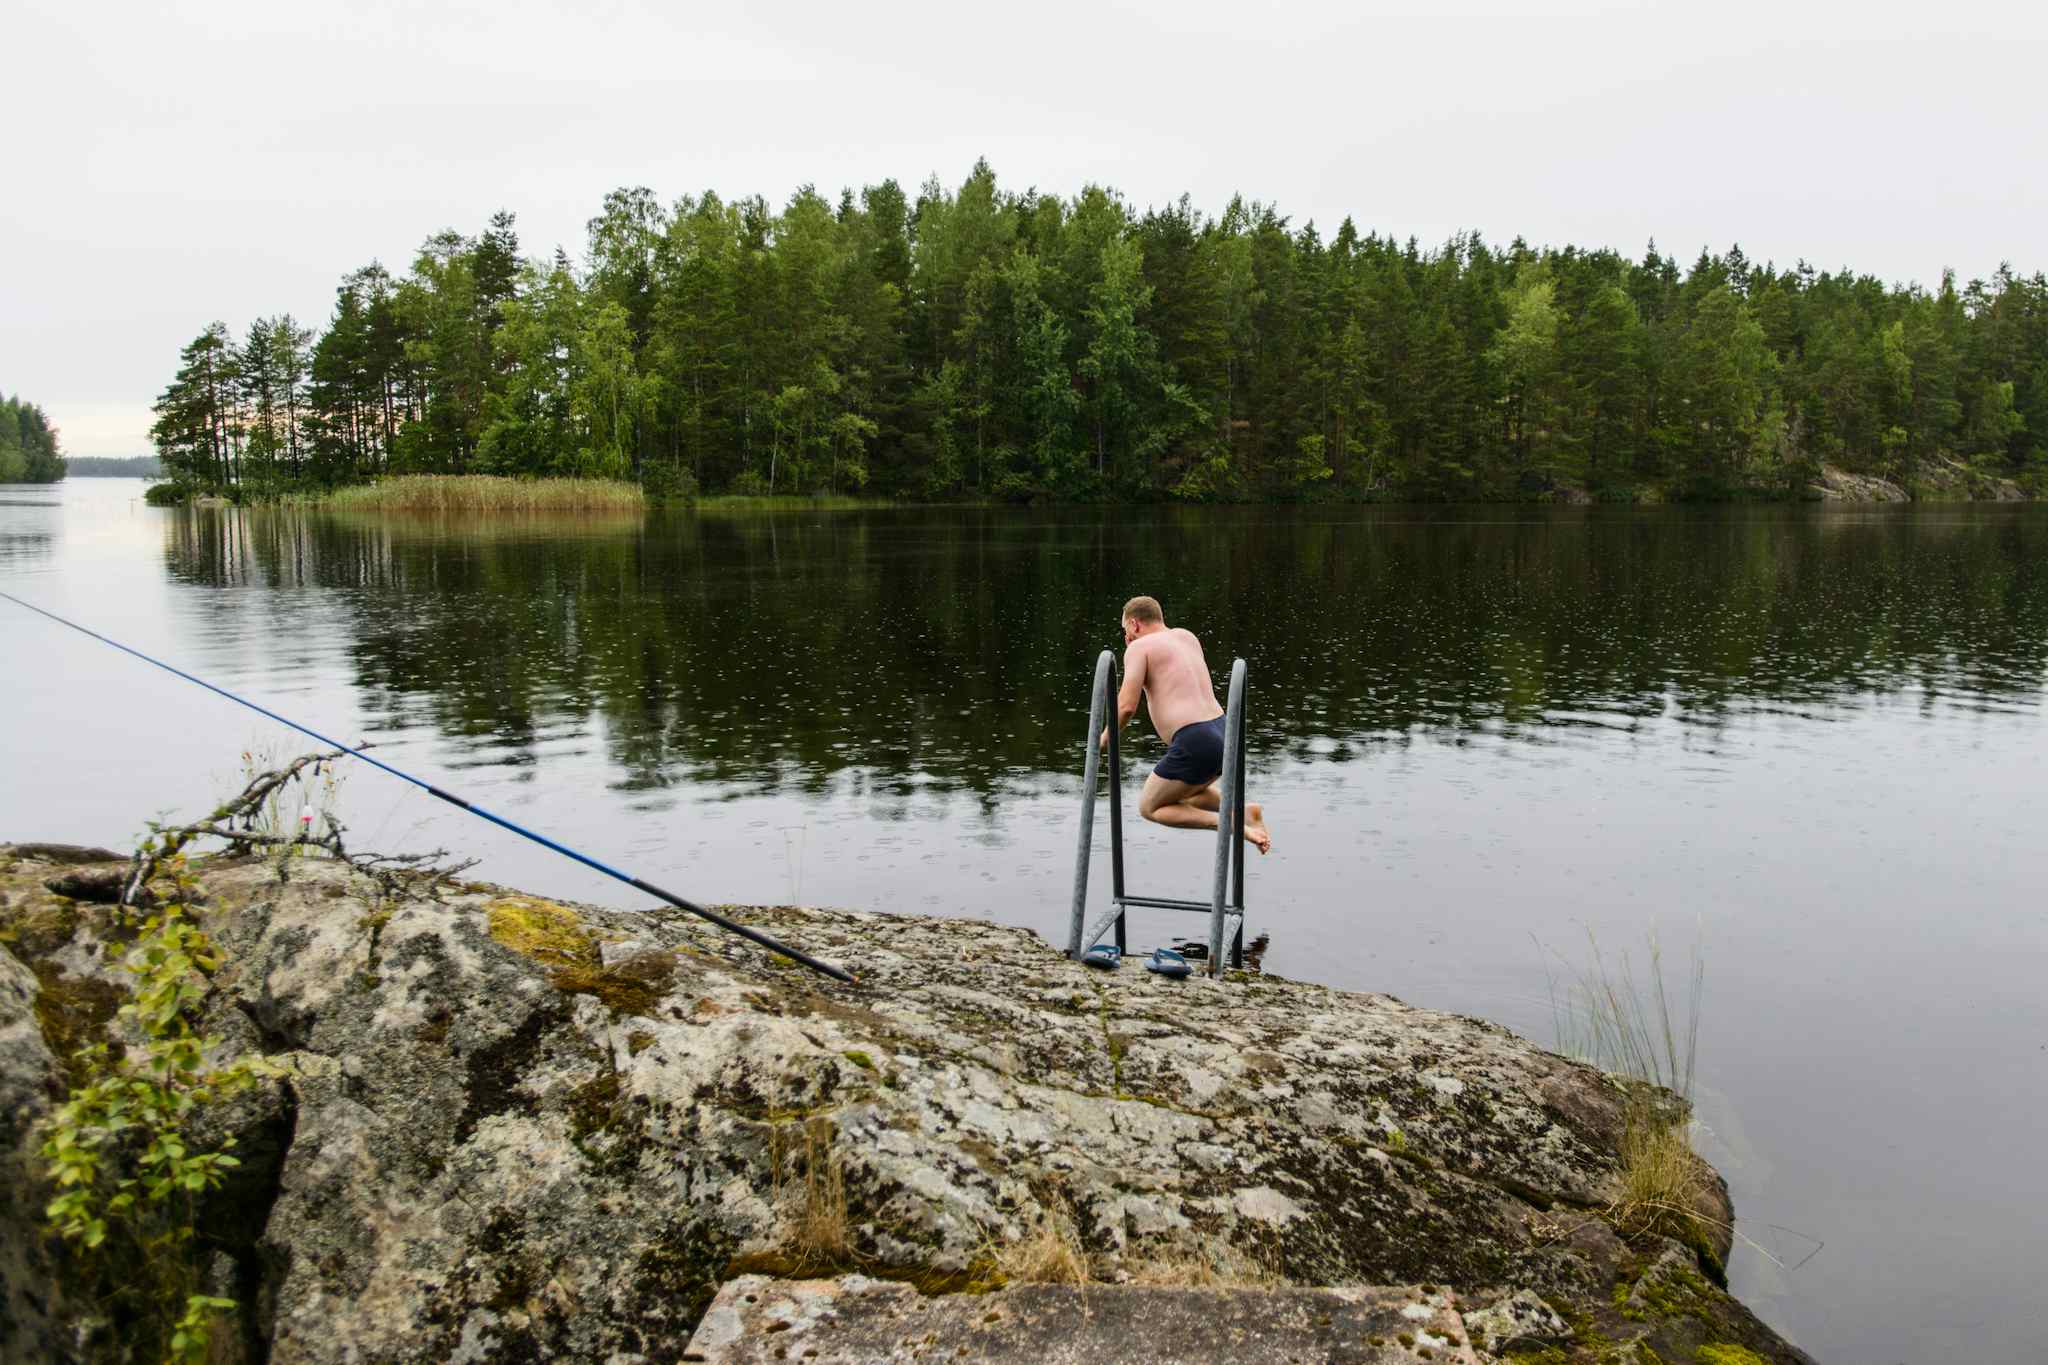 Man jumping in water after taking Finnish sauna. Photo: GettyImages-1130429204